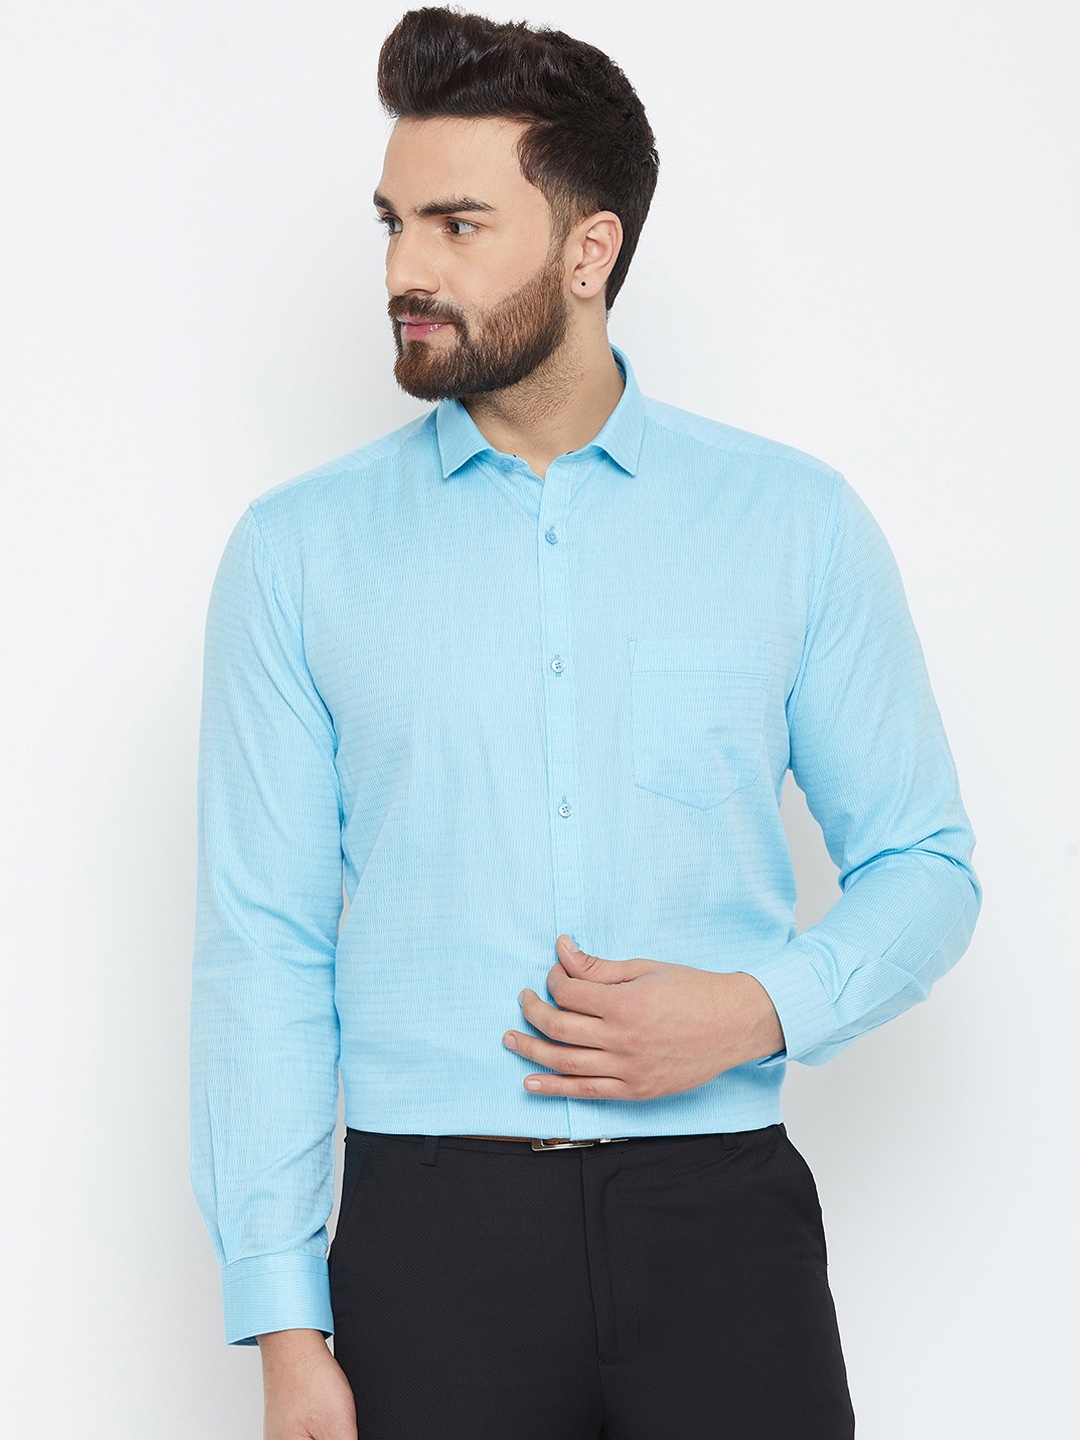 Buy Canary London Men Turquoise Blue Smart Slim Fit Solid Formal Shirt ...